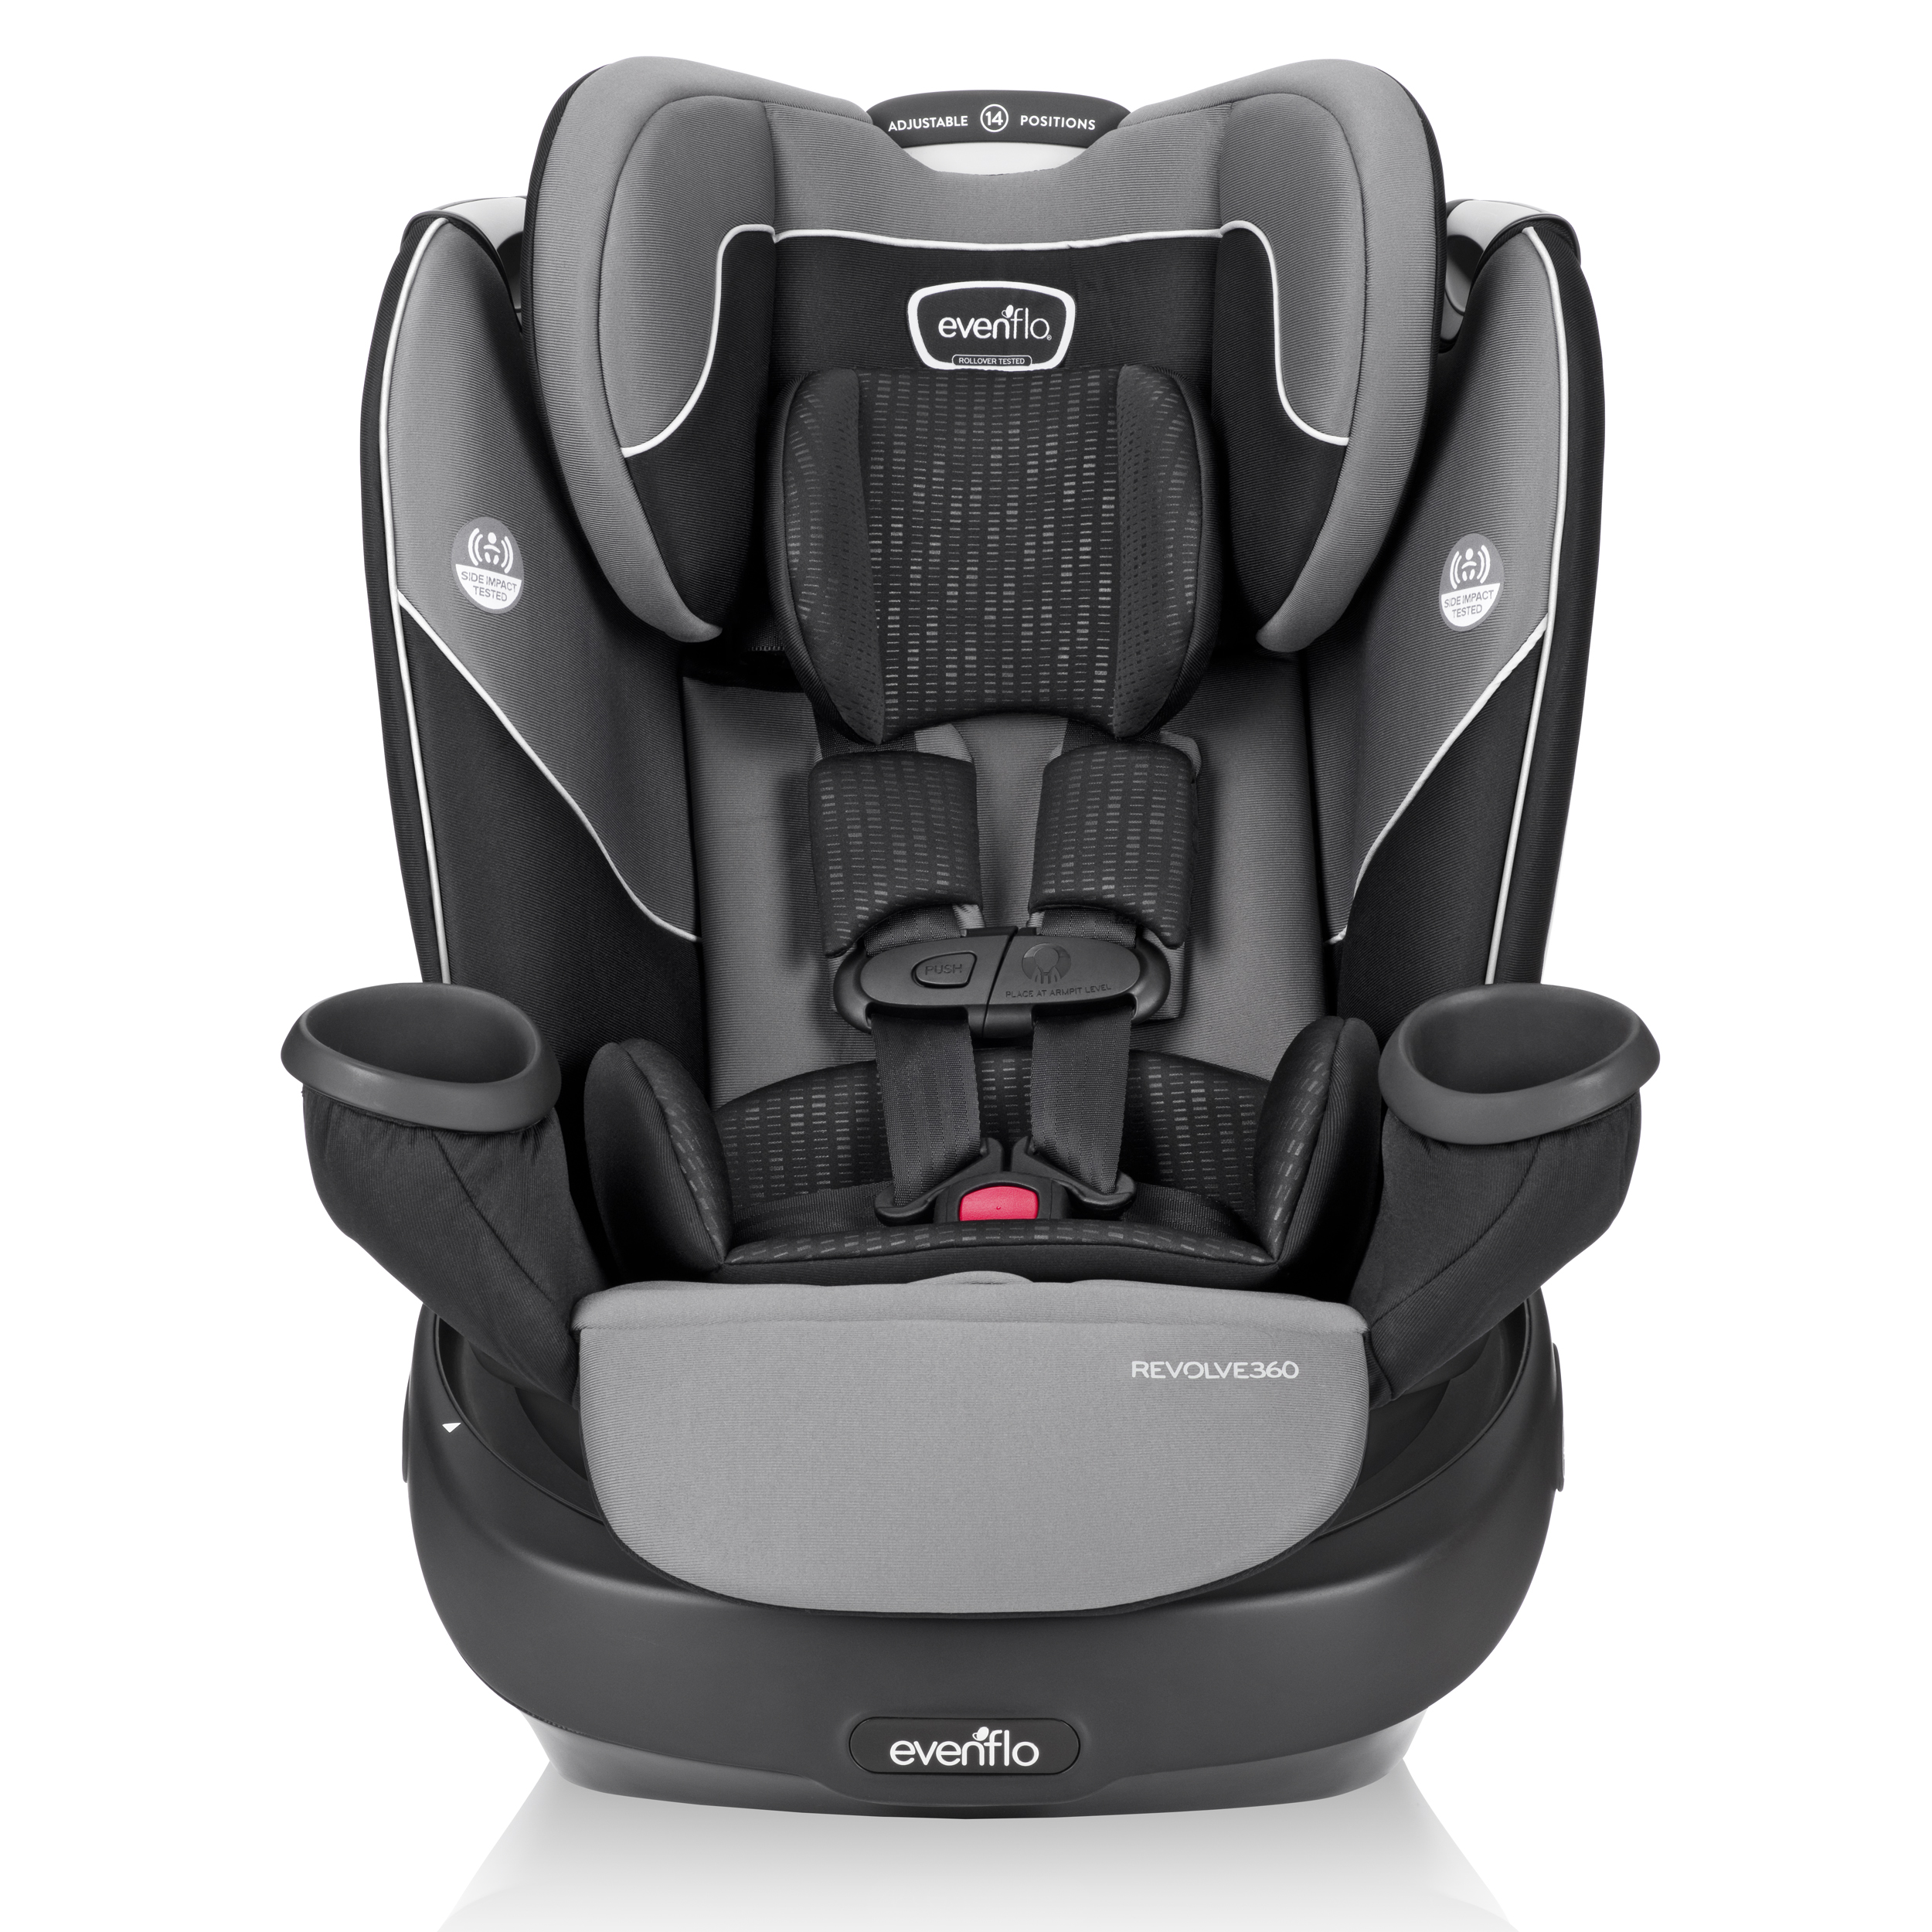 Evenflo Revolve360 Rotational All-In-One Convertible Car Seat (Amherst Gray) - image 4 of 25